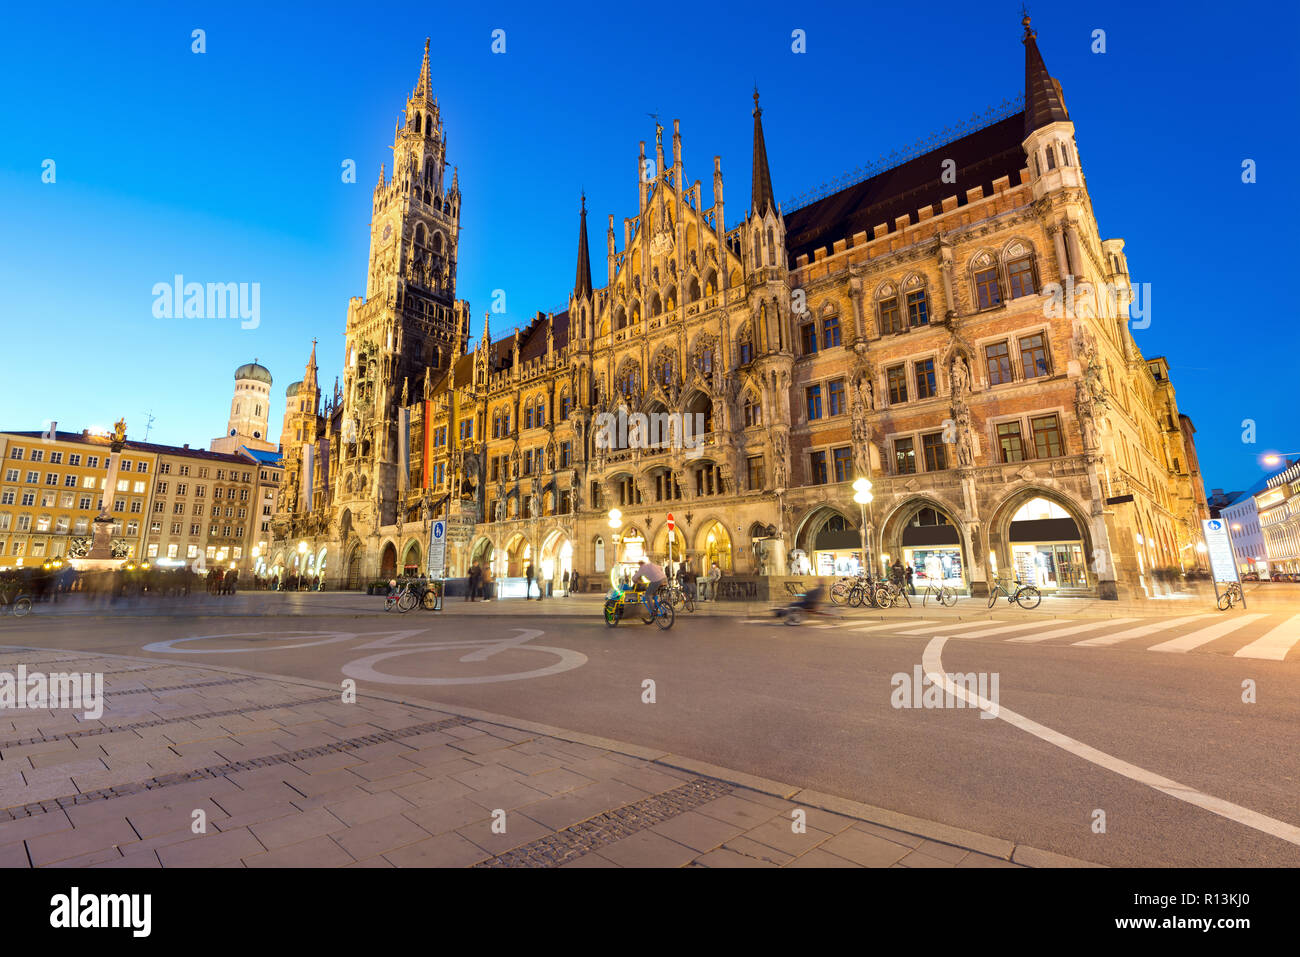 People walking at Marienplatz square and Munich city hall in night in Munich, Germany. Cafes, bars, shops and restaurants. Motion blurred people. Stock Photo